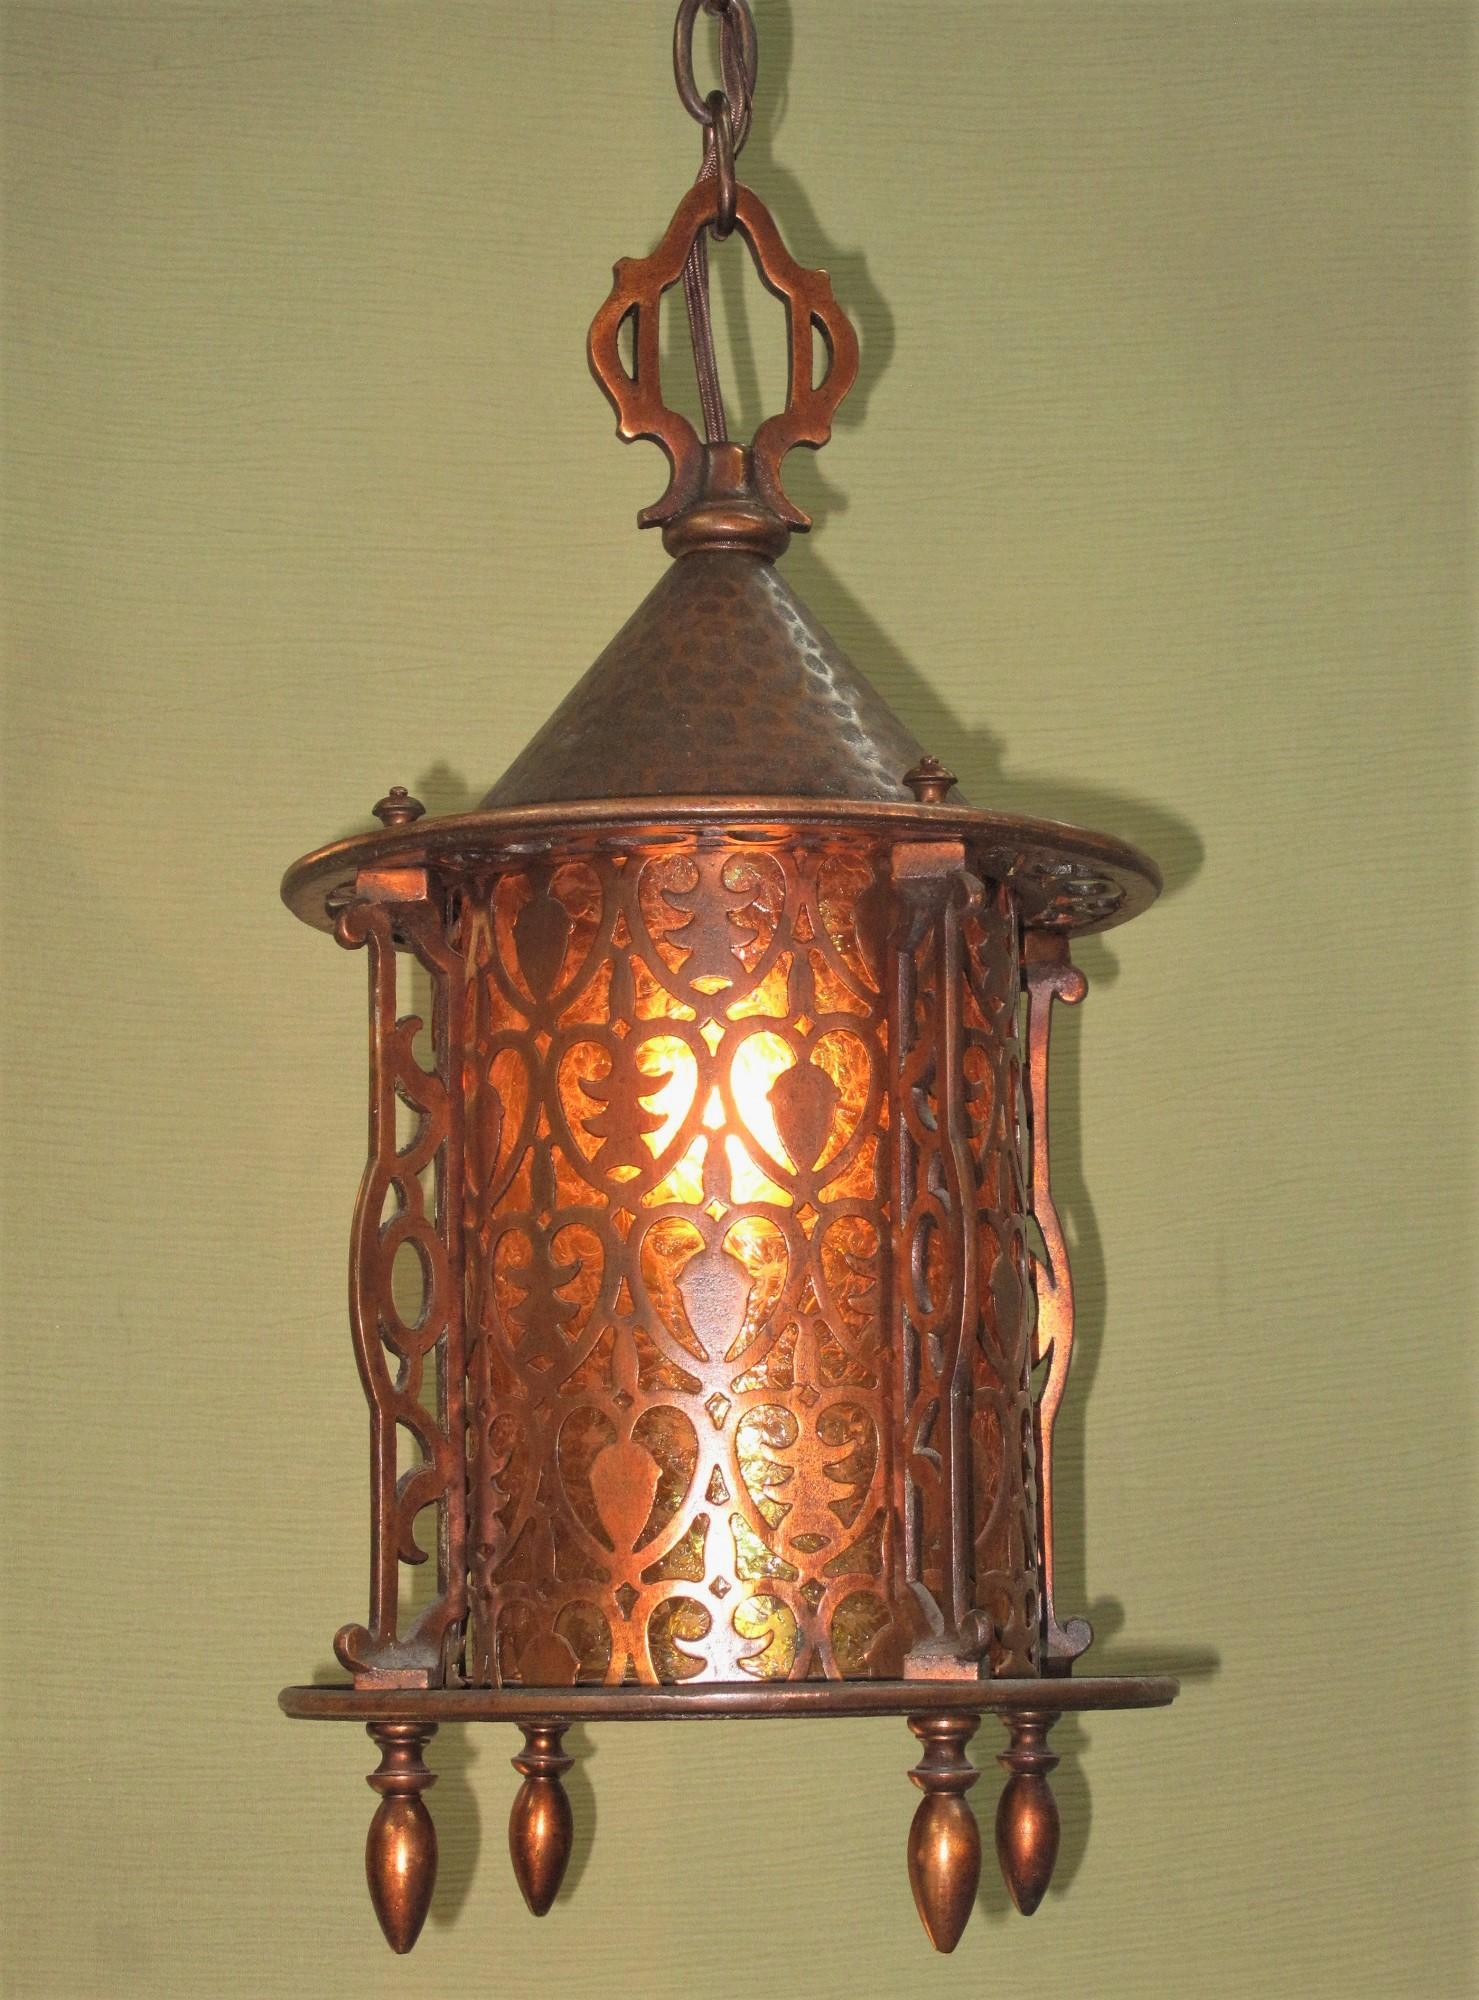 Beautifully detailed copper clad porch light with original finish, patina, oval chain, and glass shade. Rewired to UL standards including code required ground wire. Craftsman style influence with hammered shade cap and hearts cutout in the shade